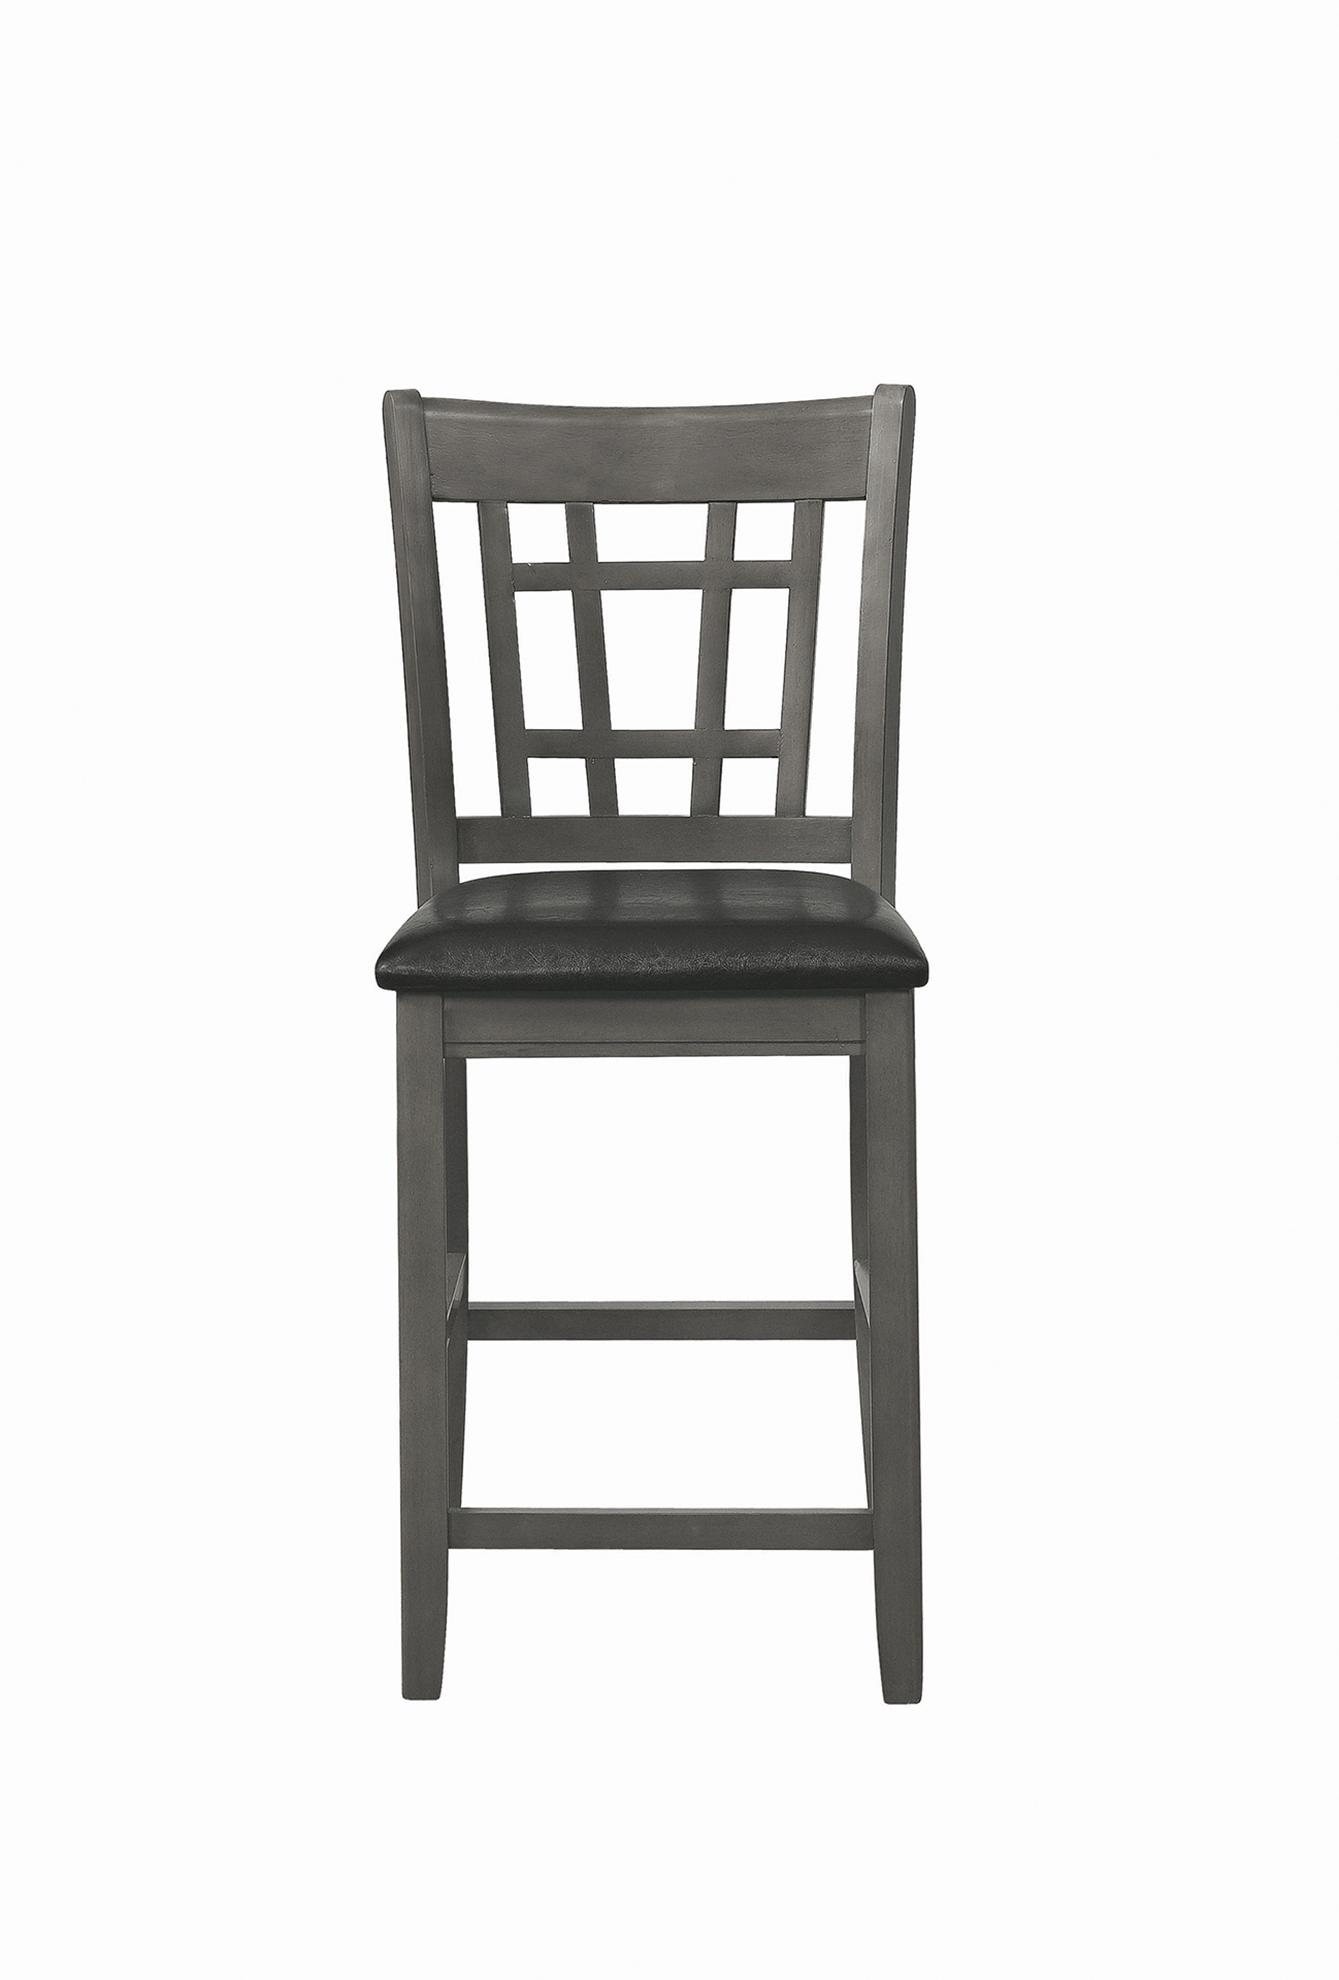 Transitional Counter Stool Set 108219 Lavon 108219 in Gray Leatherette